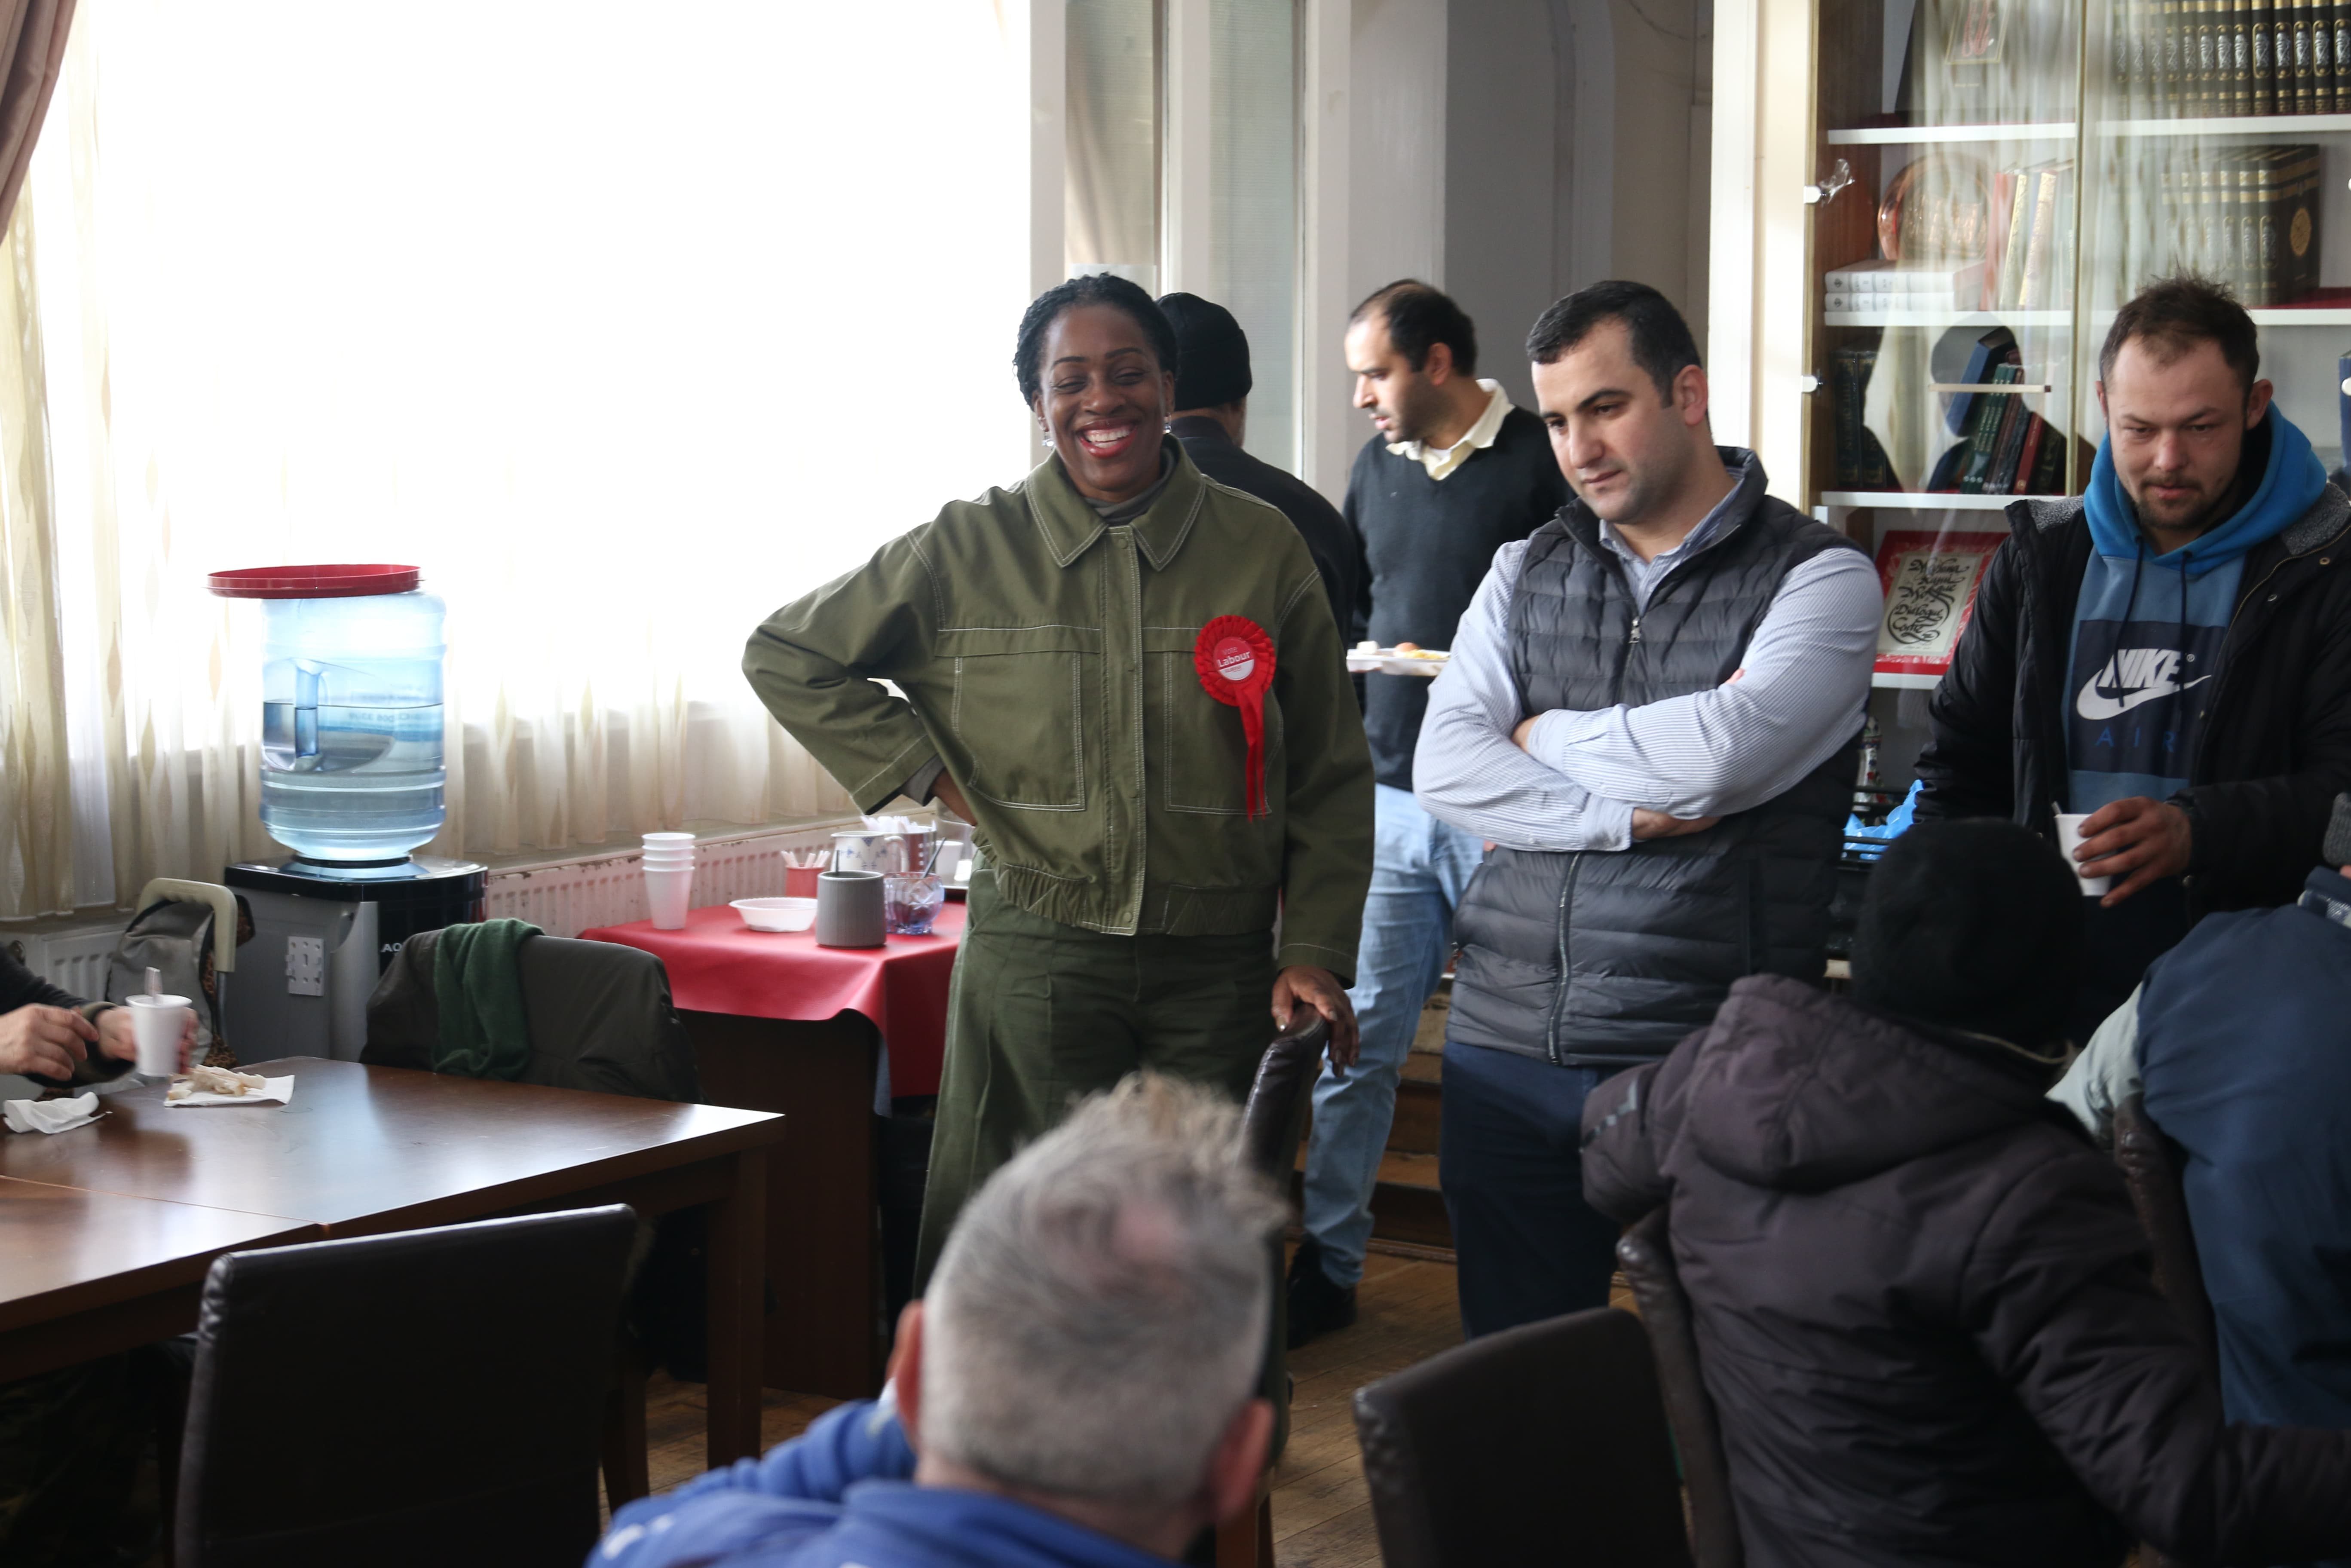 Kate Osamor | Time to Help UK charity visit 3